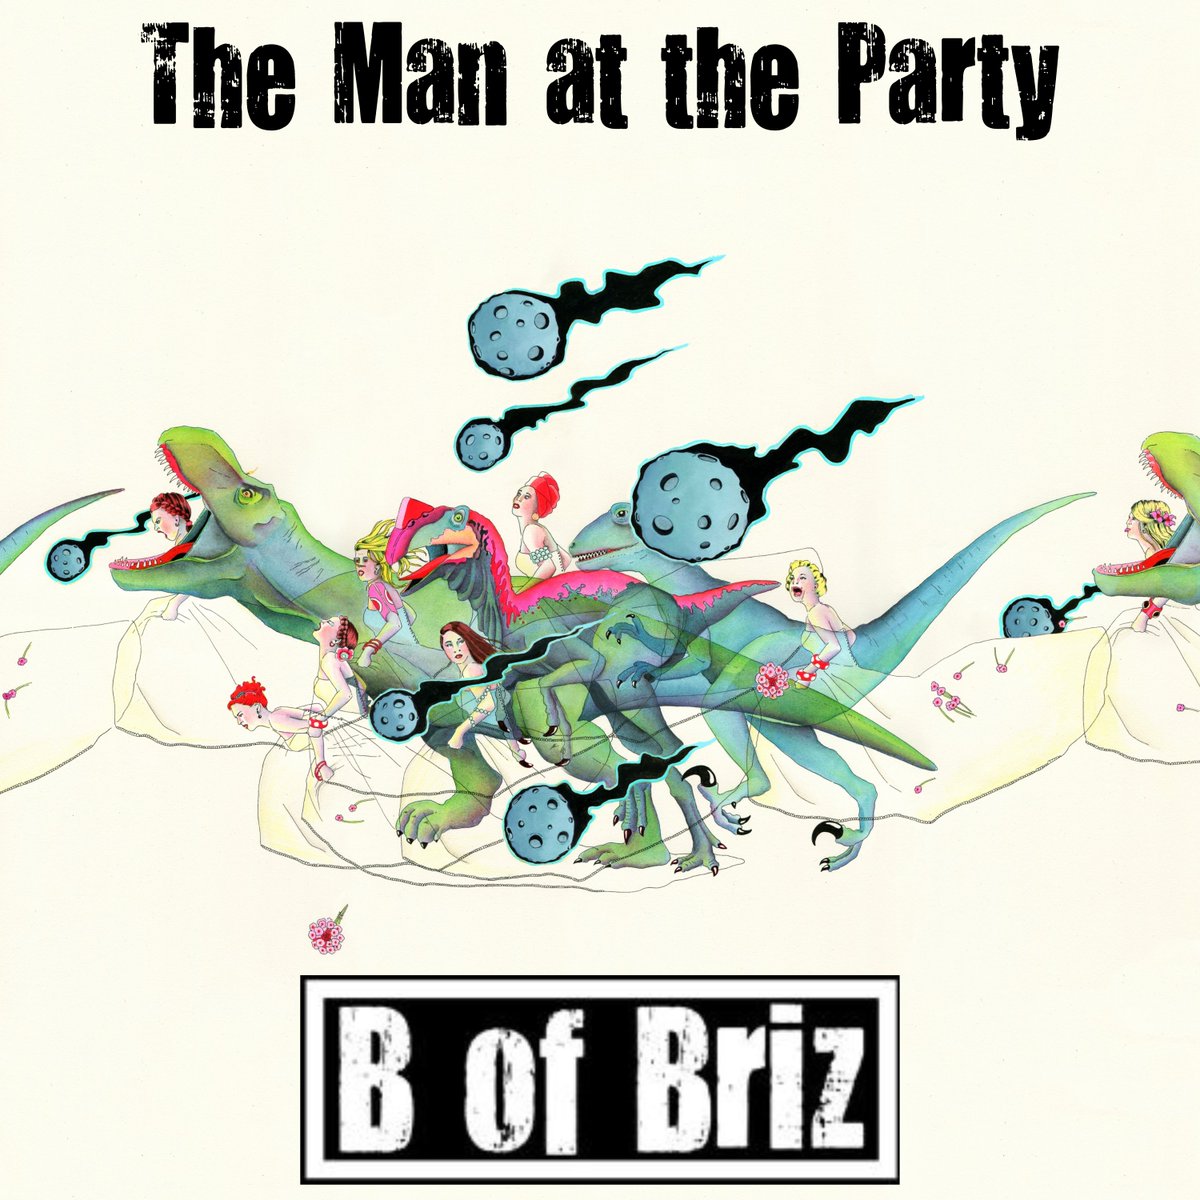 And here it is, the cover in all it’s glory! My new single is ‘The Man at the Party’ - to be released on 29th May – I can’t wait to share it with you.
#emergingartists #womeninmusic #womeninhiphop #bristolhiphop #bristolmusic #futuresoundofbristol #ukrap #ukmusic #ukhiphop